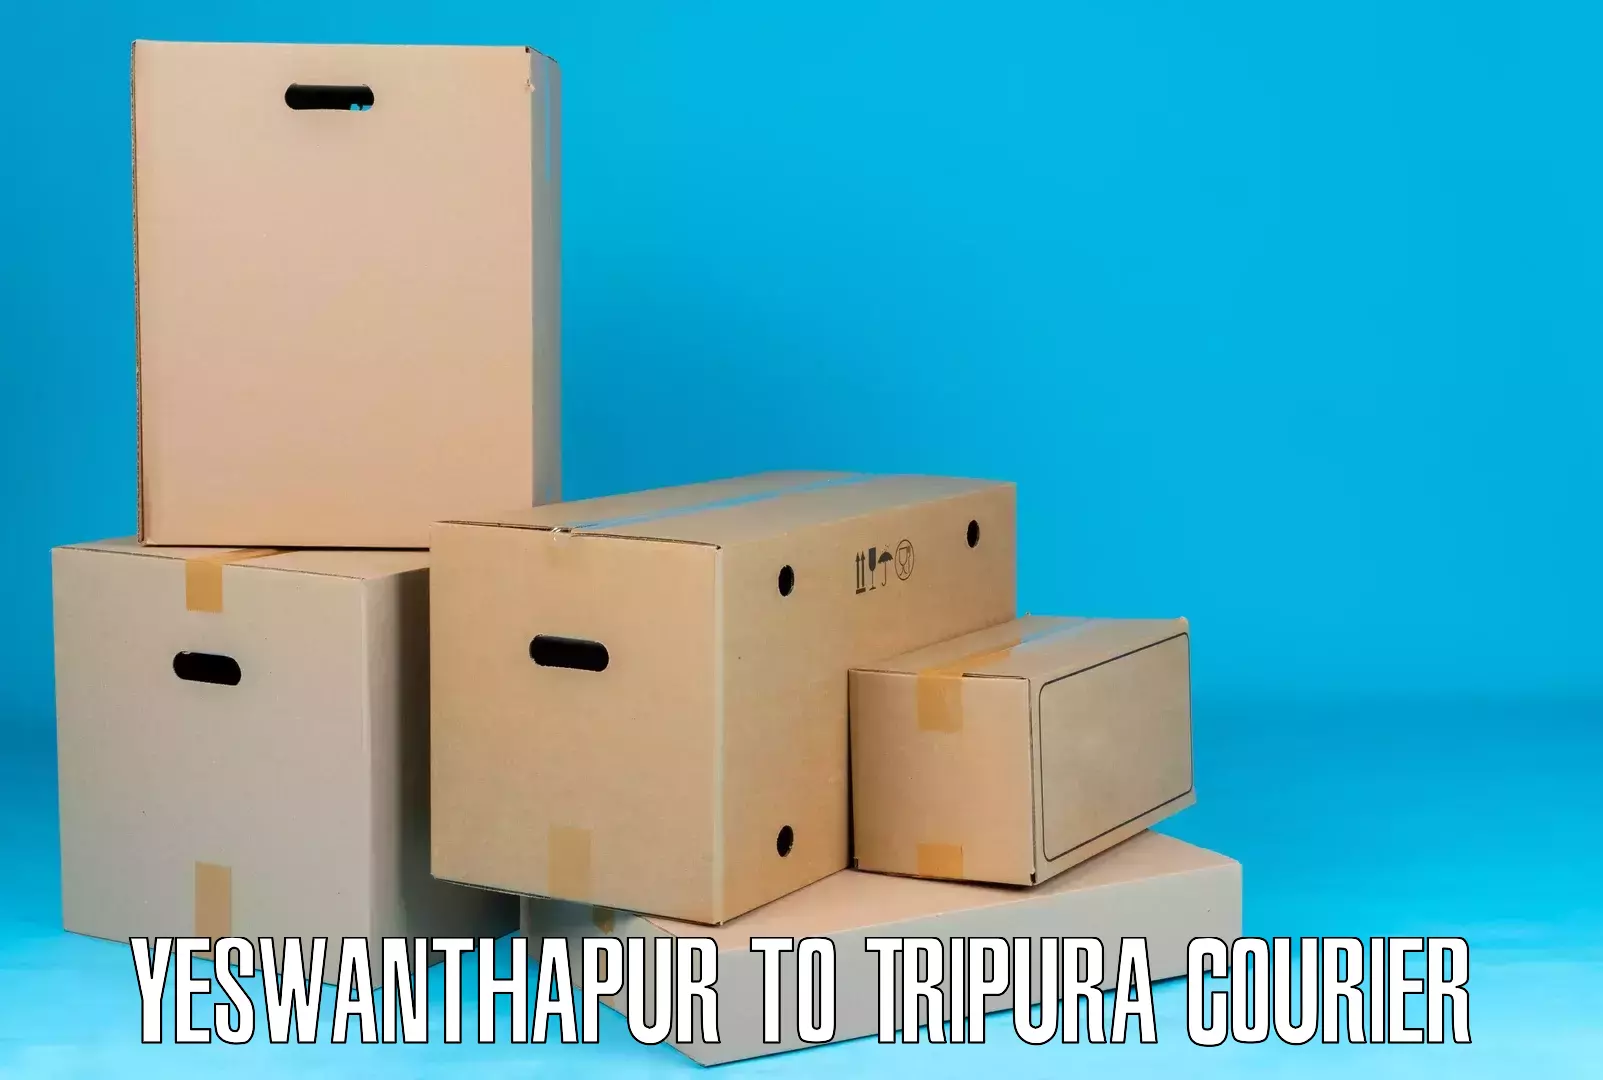 Express courier capabilities Yeswanthapur to Amarpur